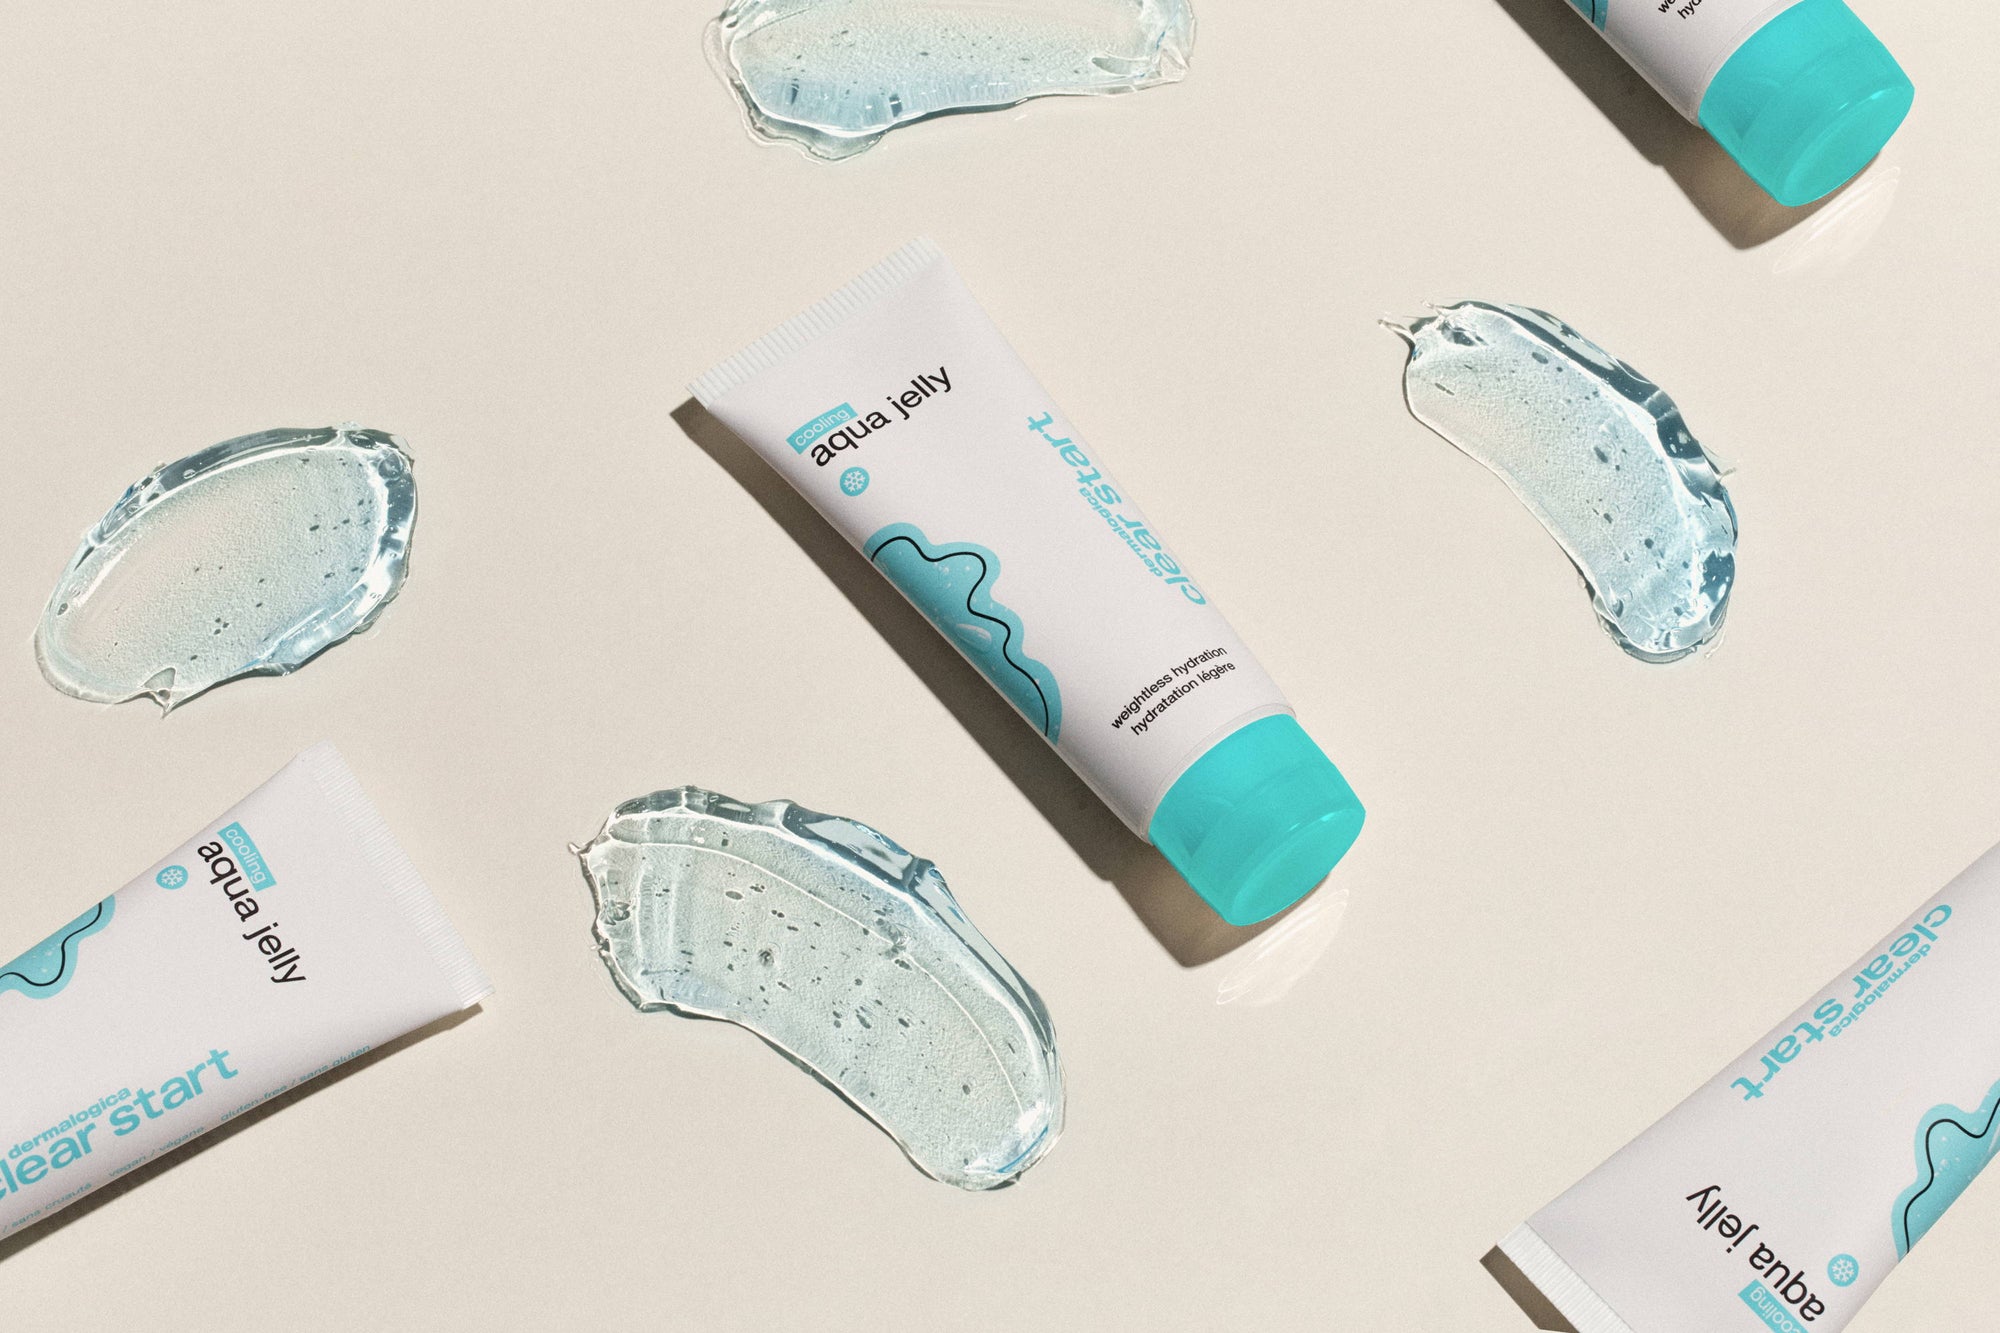 NEW! Dermalogica's Cooling Aqua Jelly Just Landed!